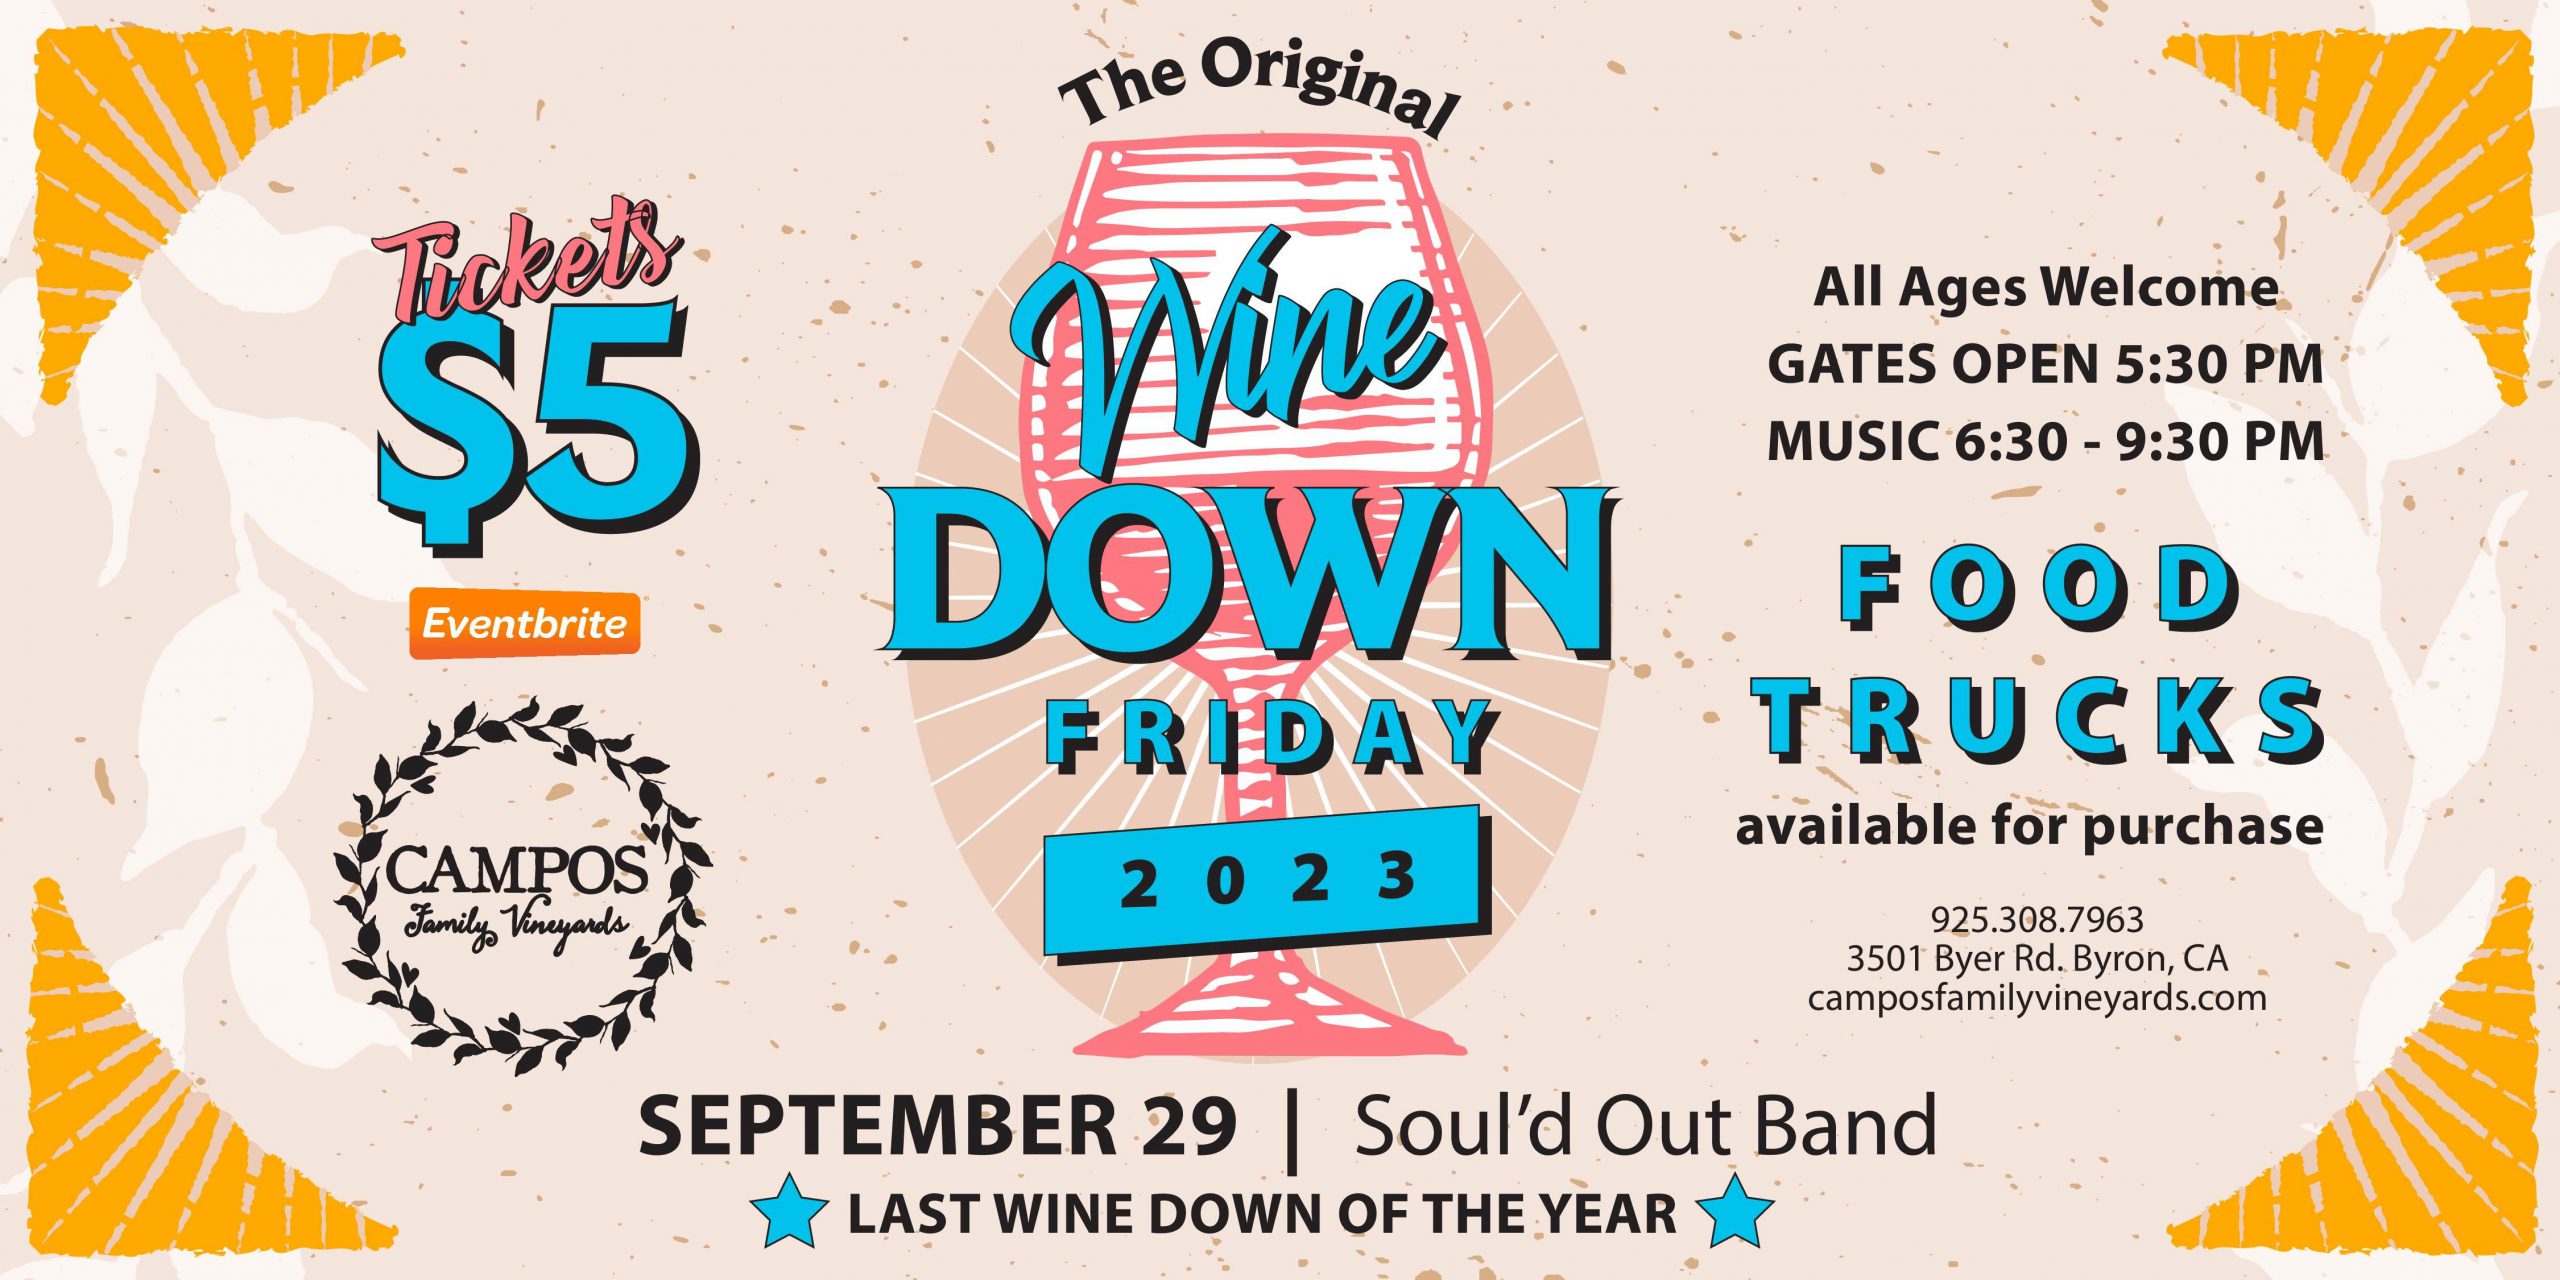 The Original Wine Down Friday - Soul'd Out Band!